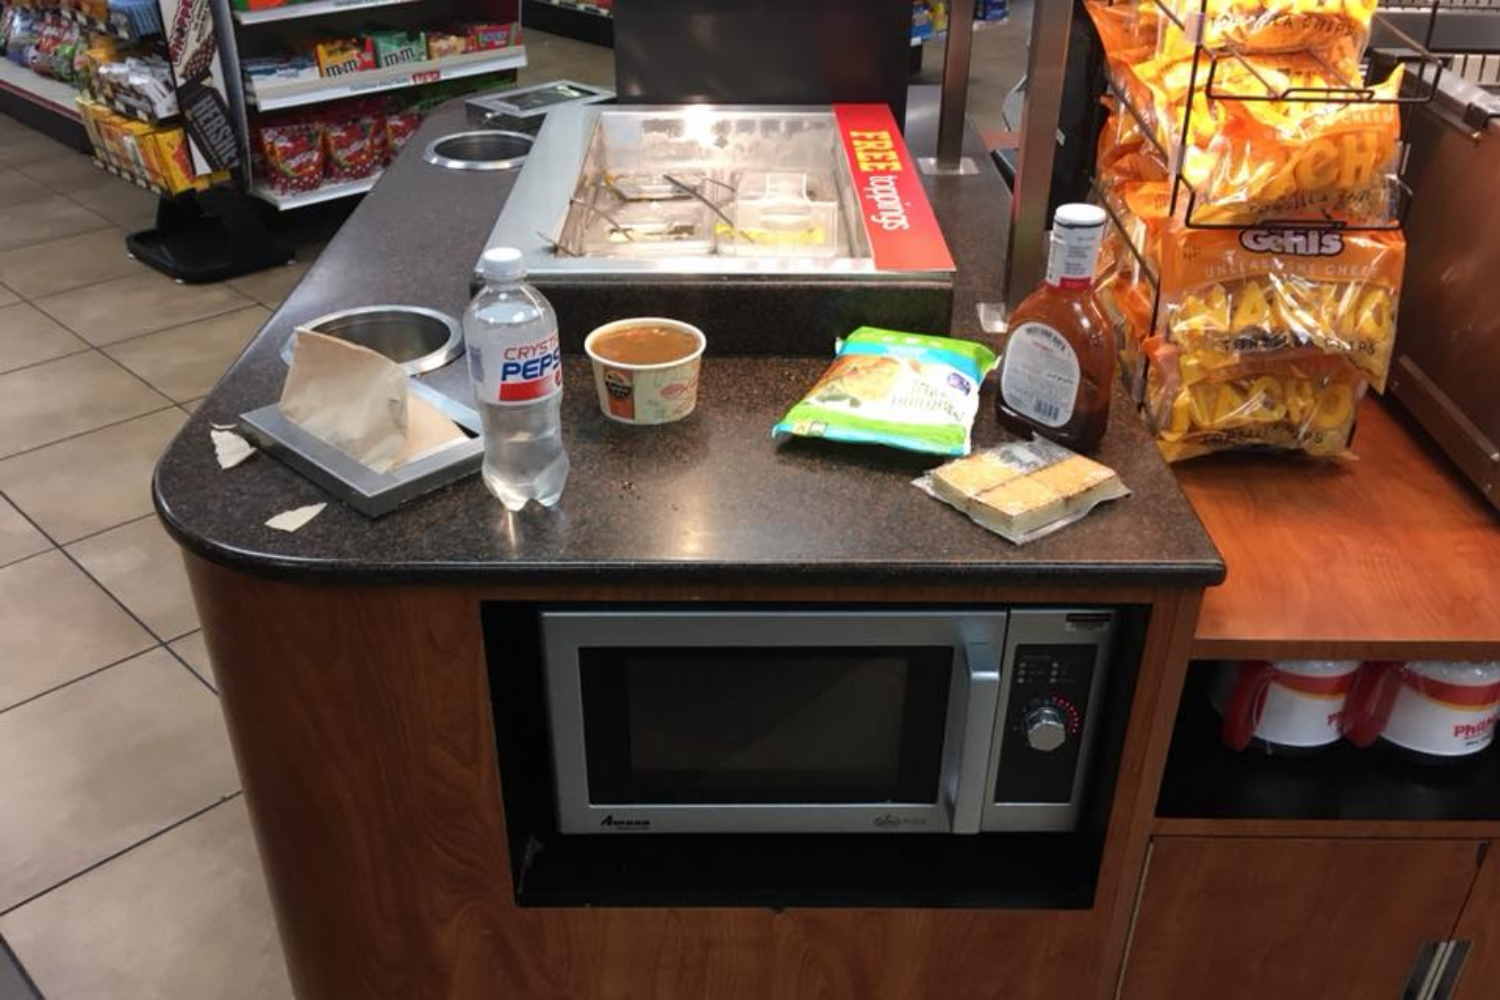 Do truck stops have microwaves?